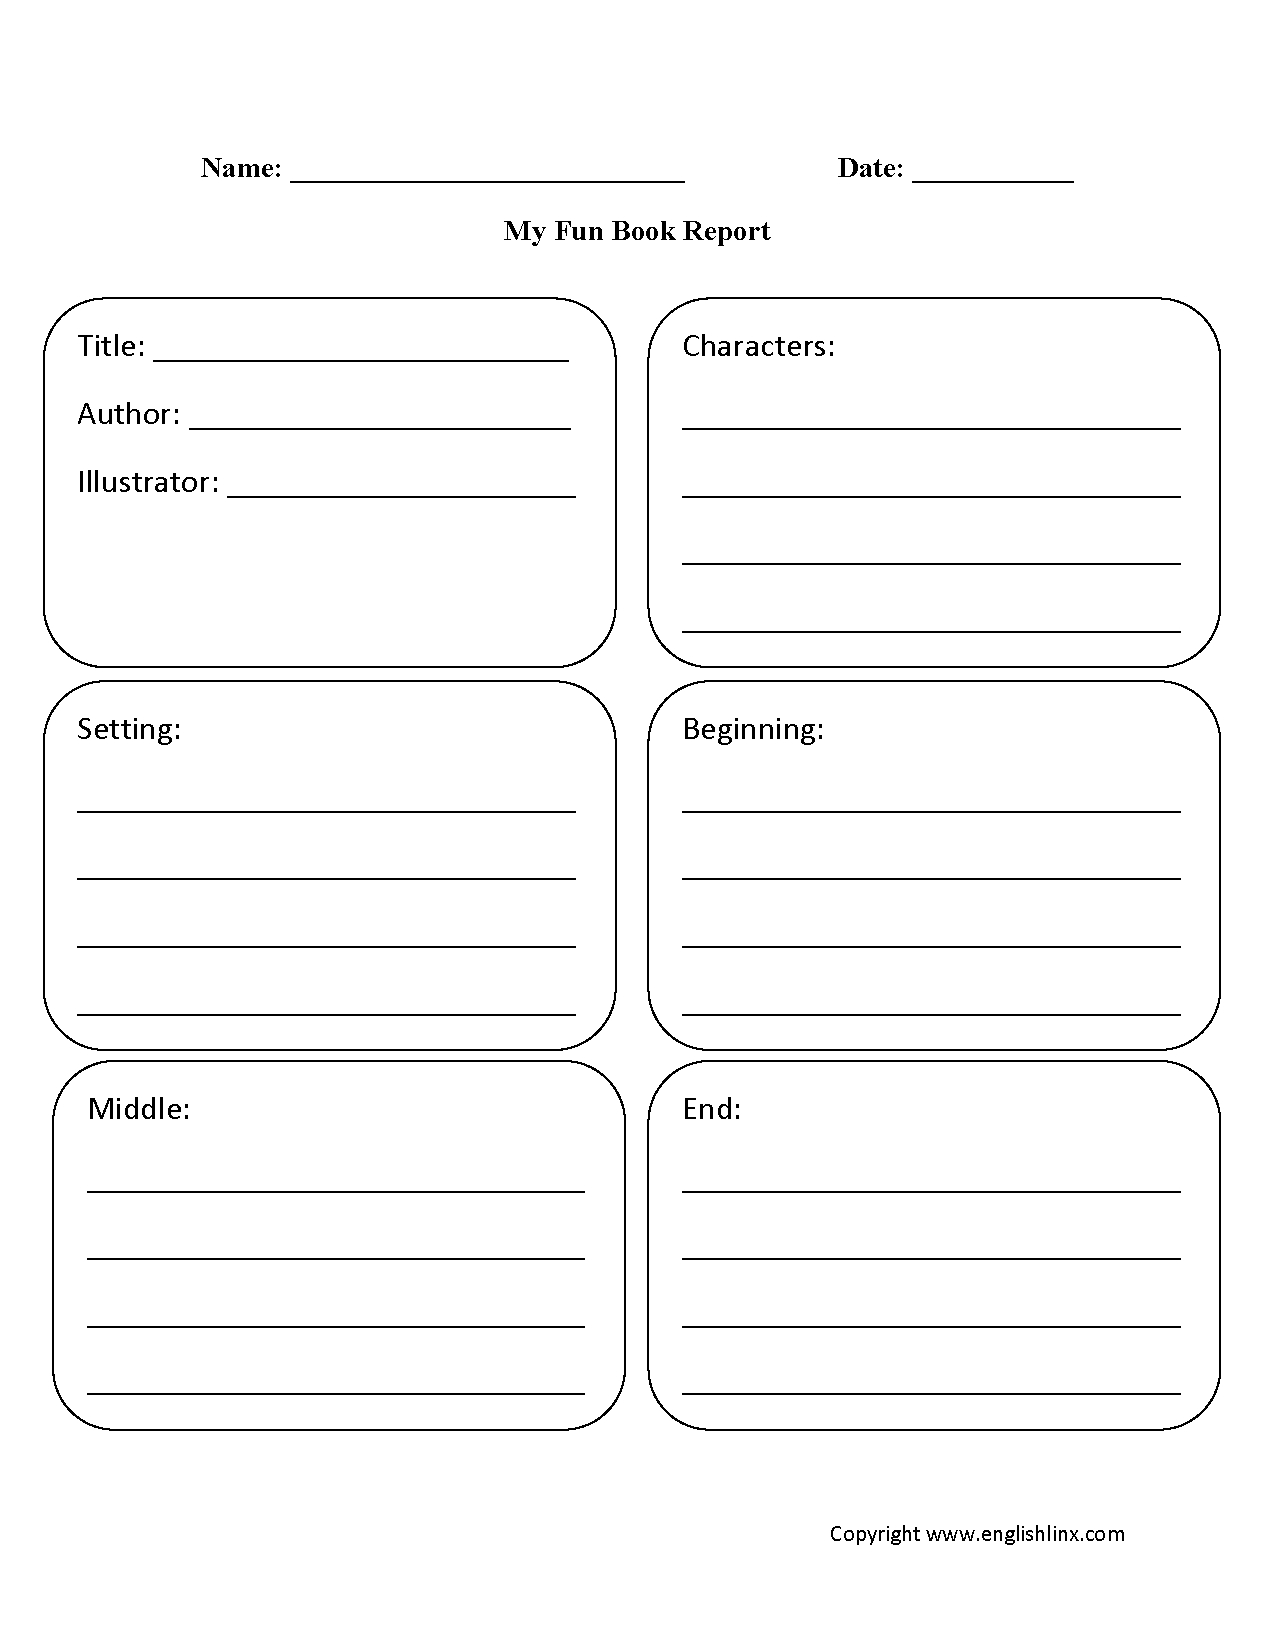 Englishlinx | Book Report Worksheets With Regard To Biography Book Report Template